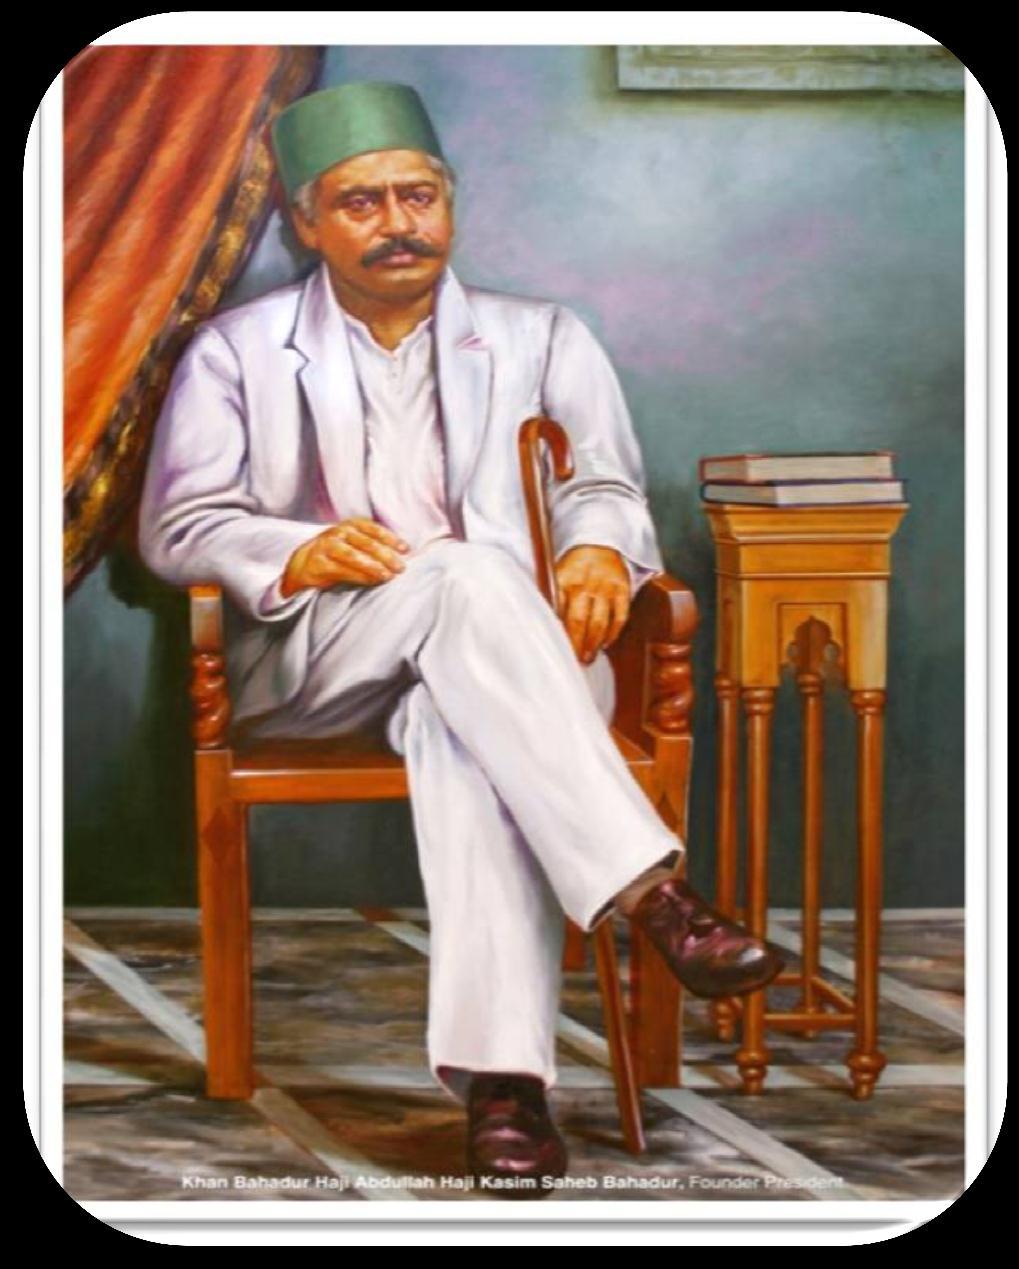 Founder: Shri Haji Abdullah Haji Bahadur Saheb Bahadur Corporation Bank was founded in the Year 1906 in Udupi a small town in South India Nationalized in the year 1980 and went public in 1998 The